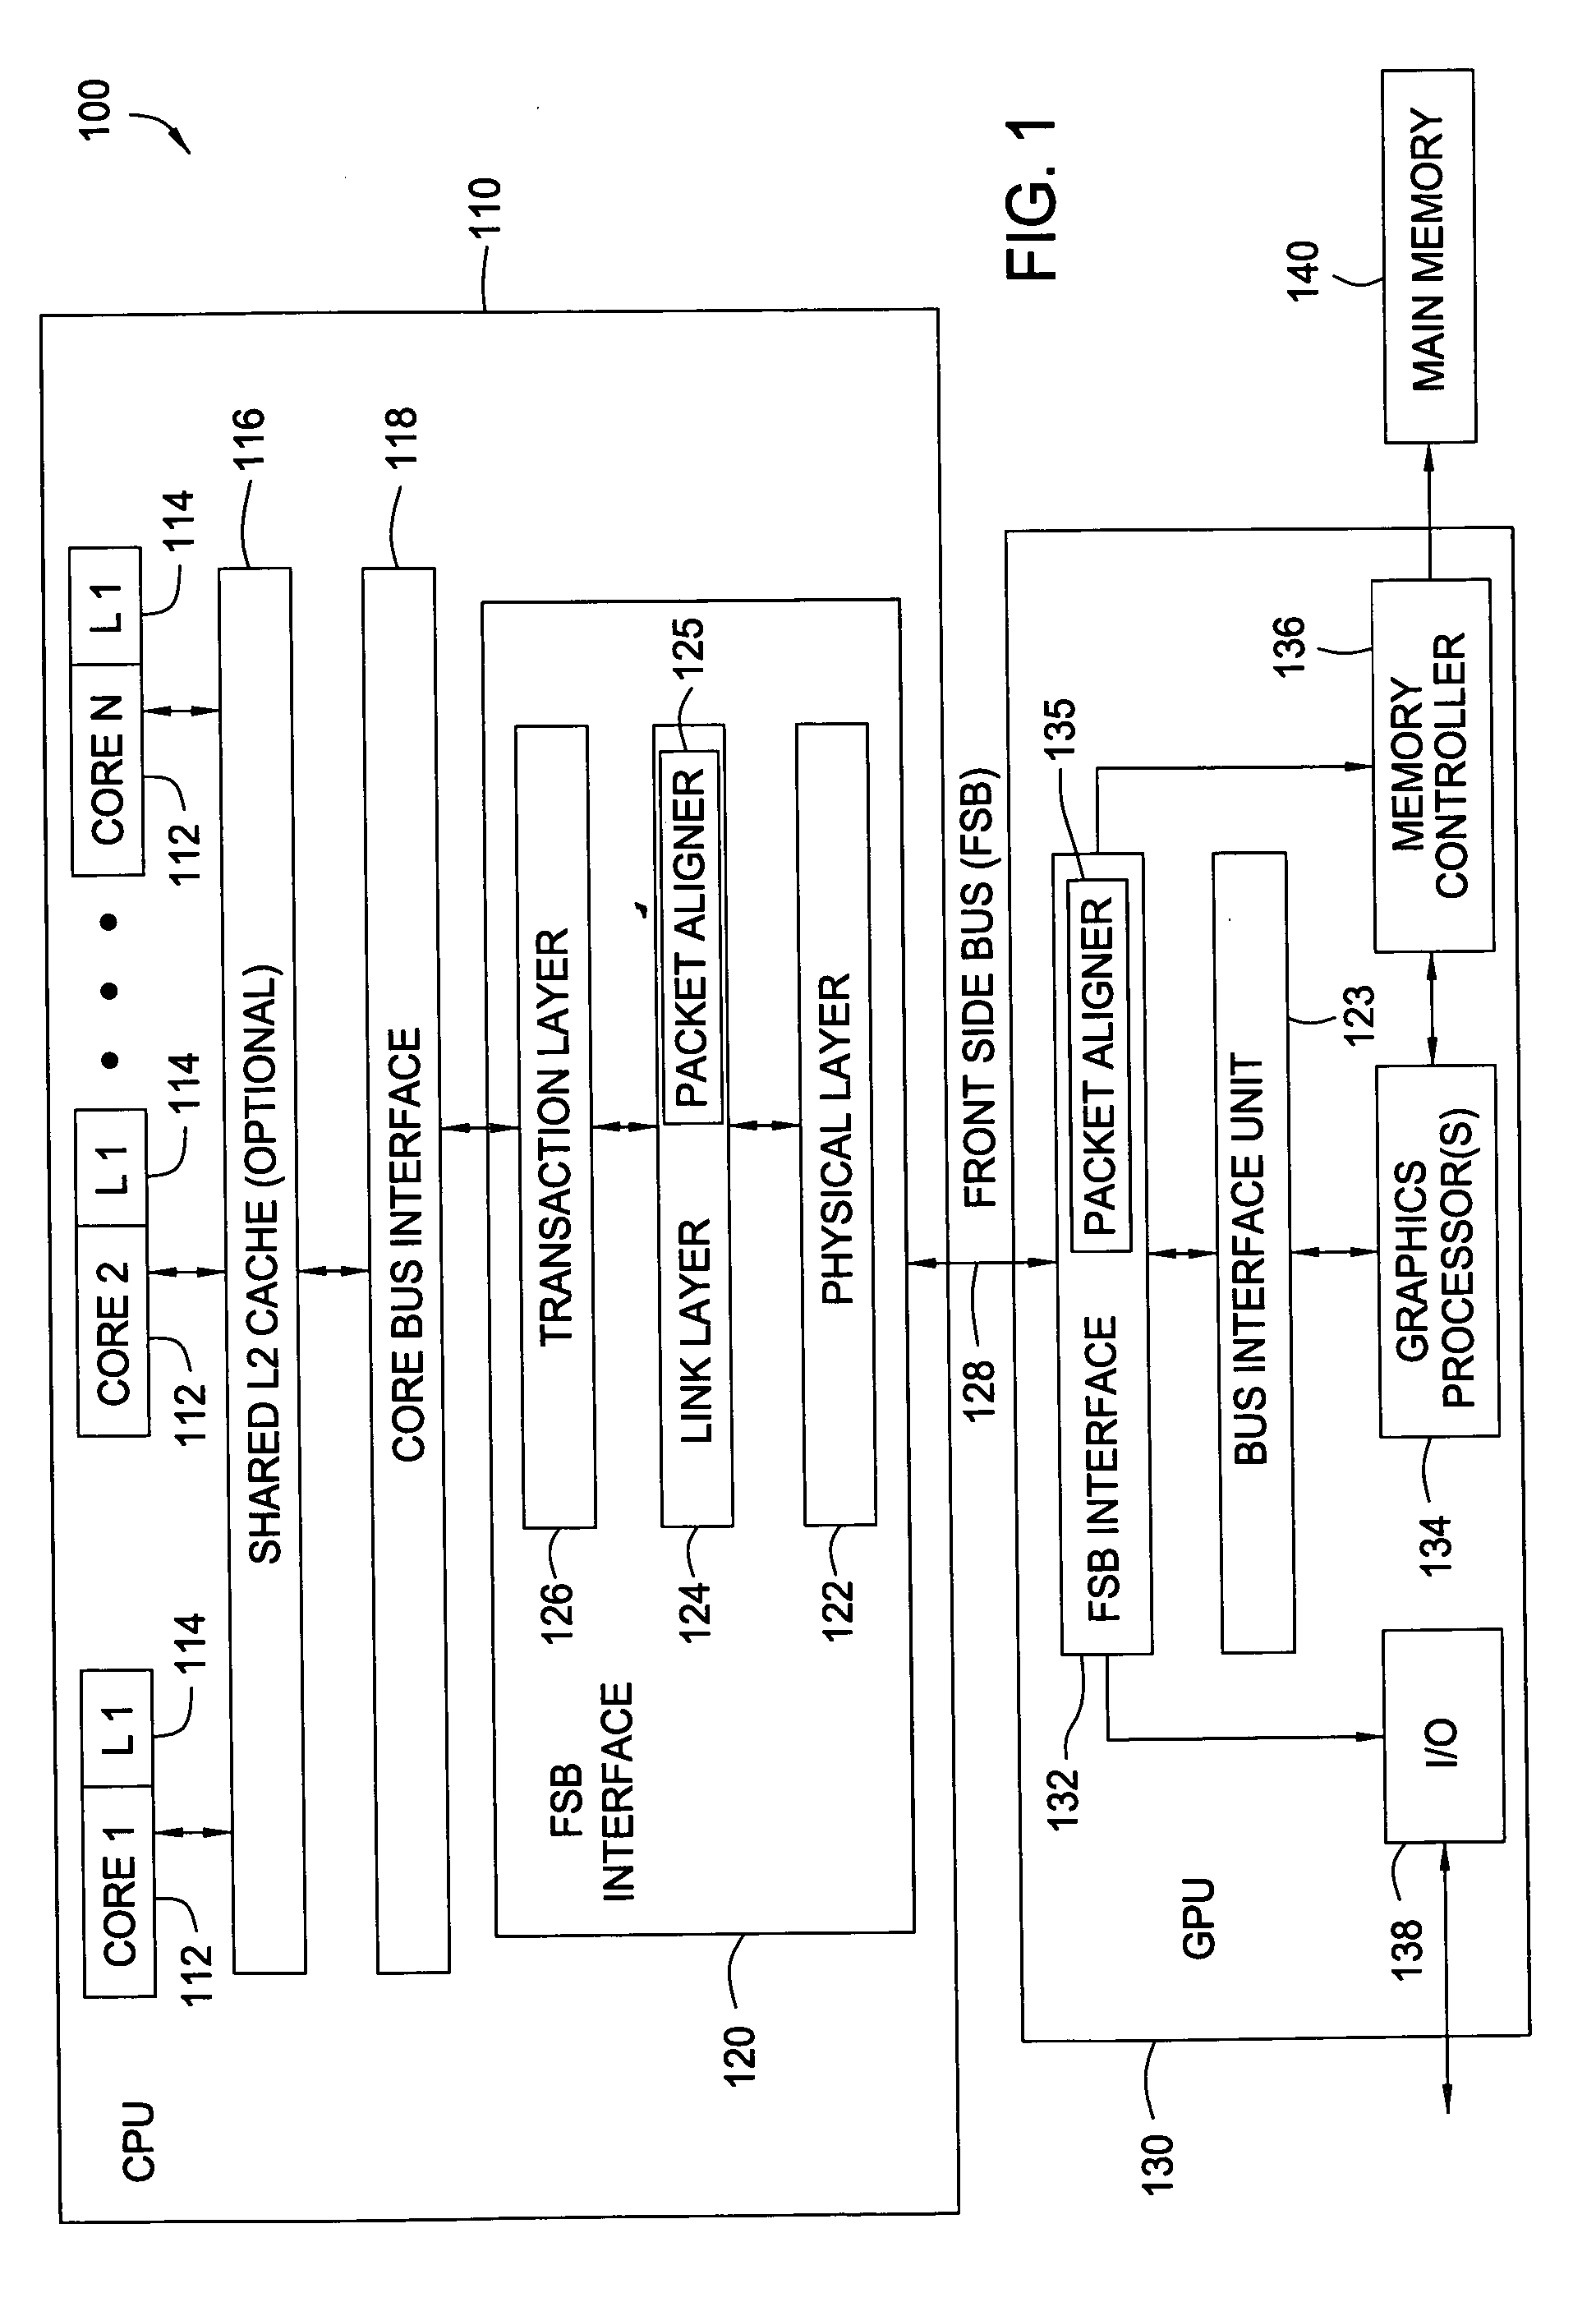 Byte to byte alignment of multi-path data